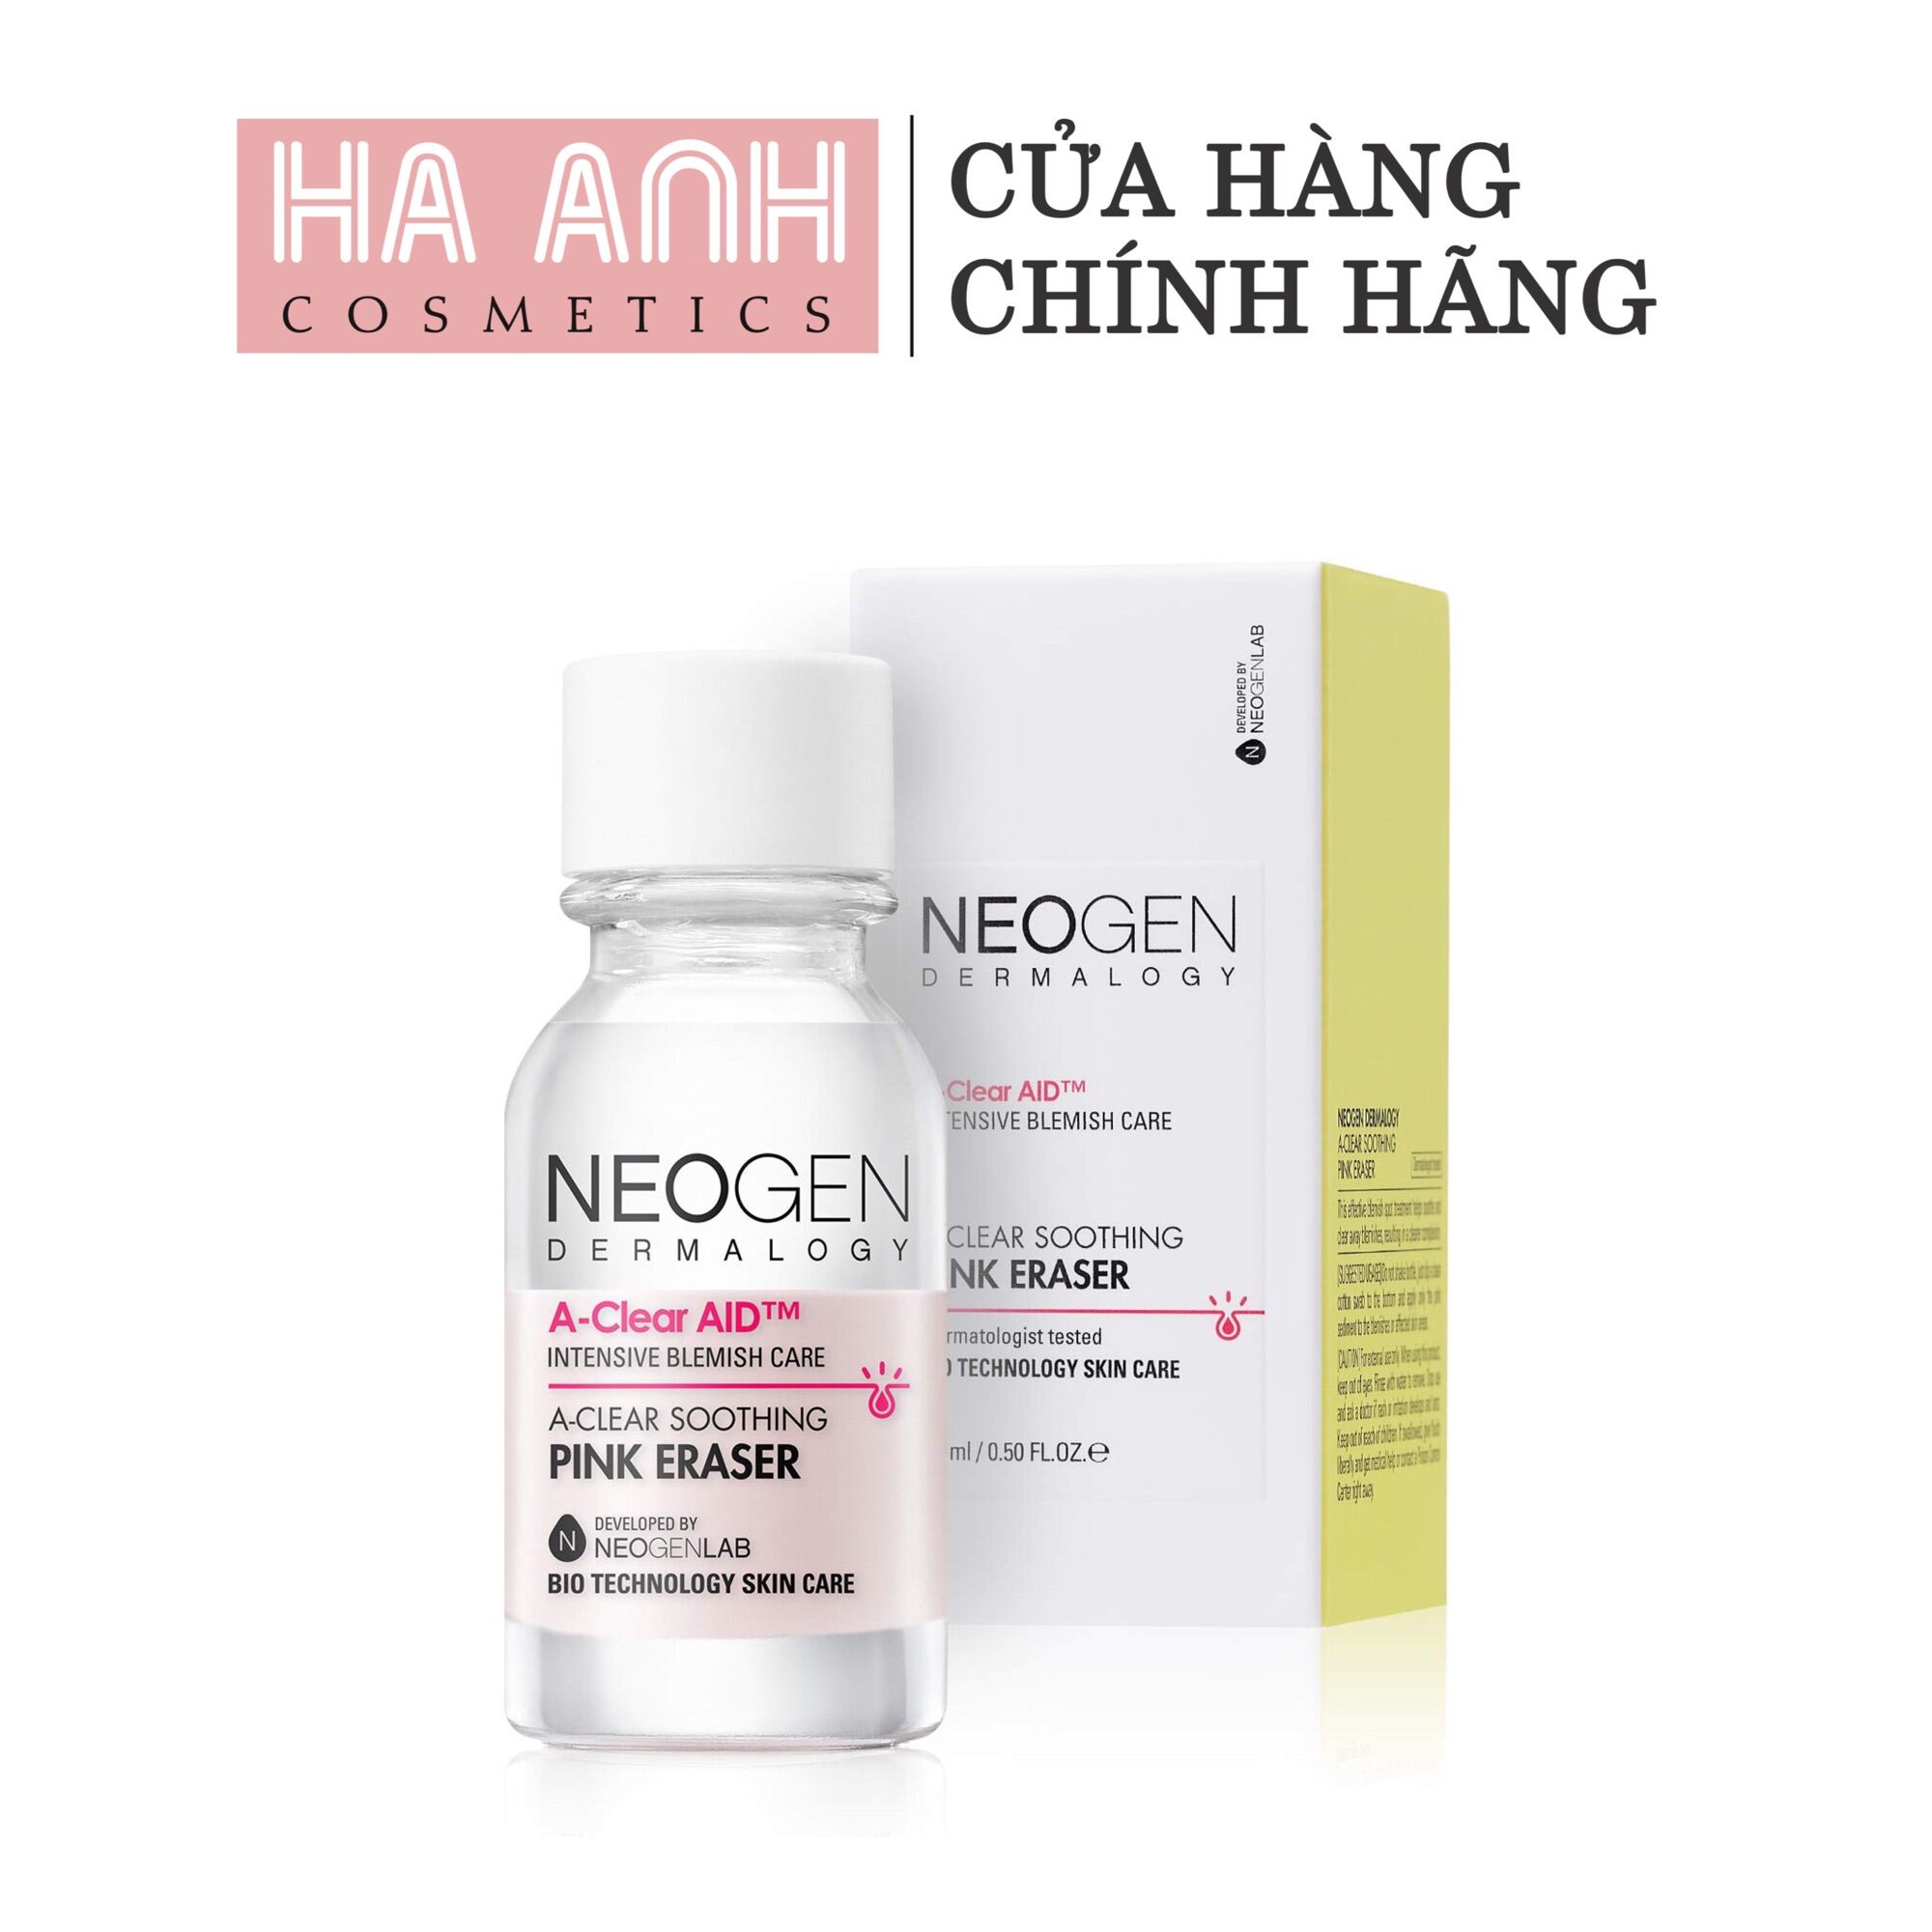 DUNG DỊCH CHẤM MỤN NEOGEN DERMALOGY A-CLEAR SOOTHING PINK ERASER